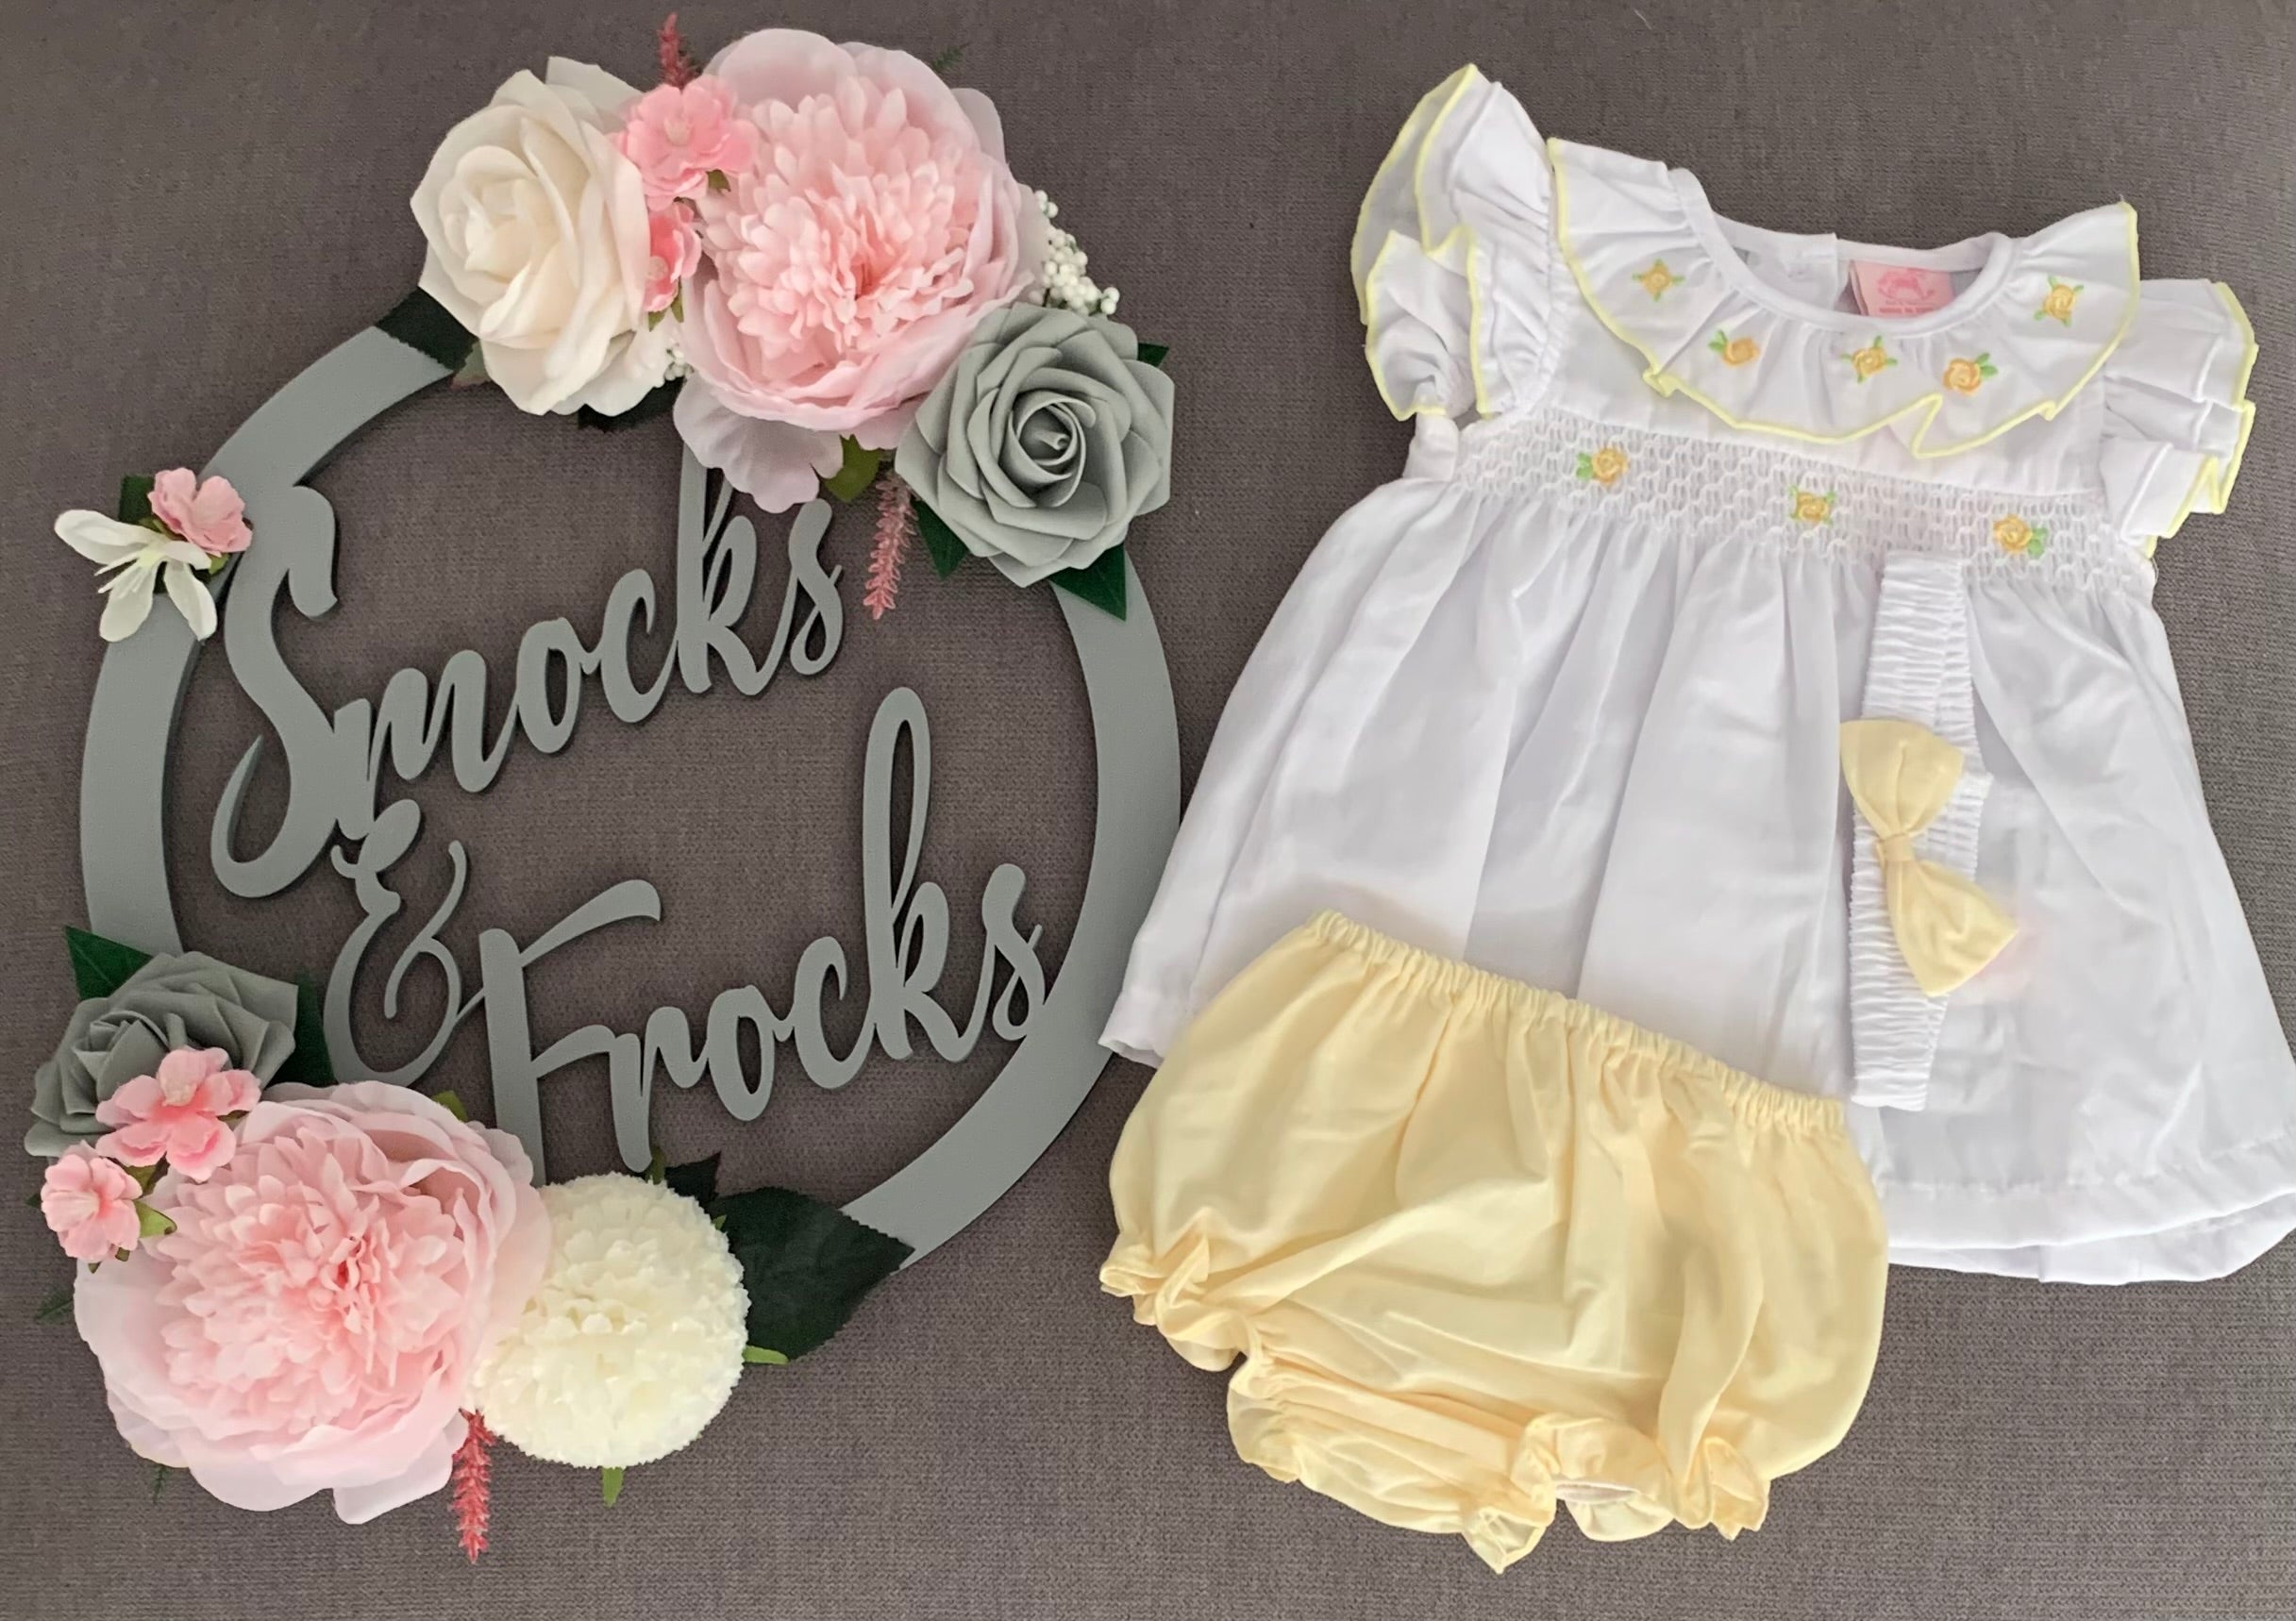 Rock-A-Bye - Rose and Smocked Detail Dress with Bow Headband - D06367B